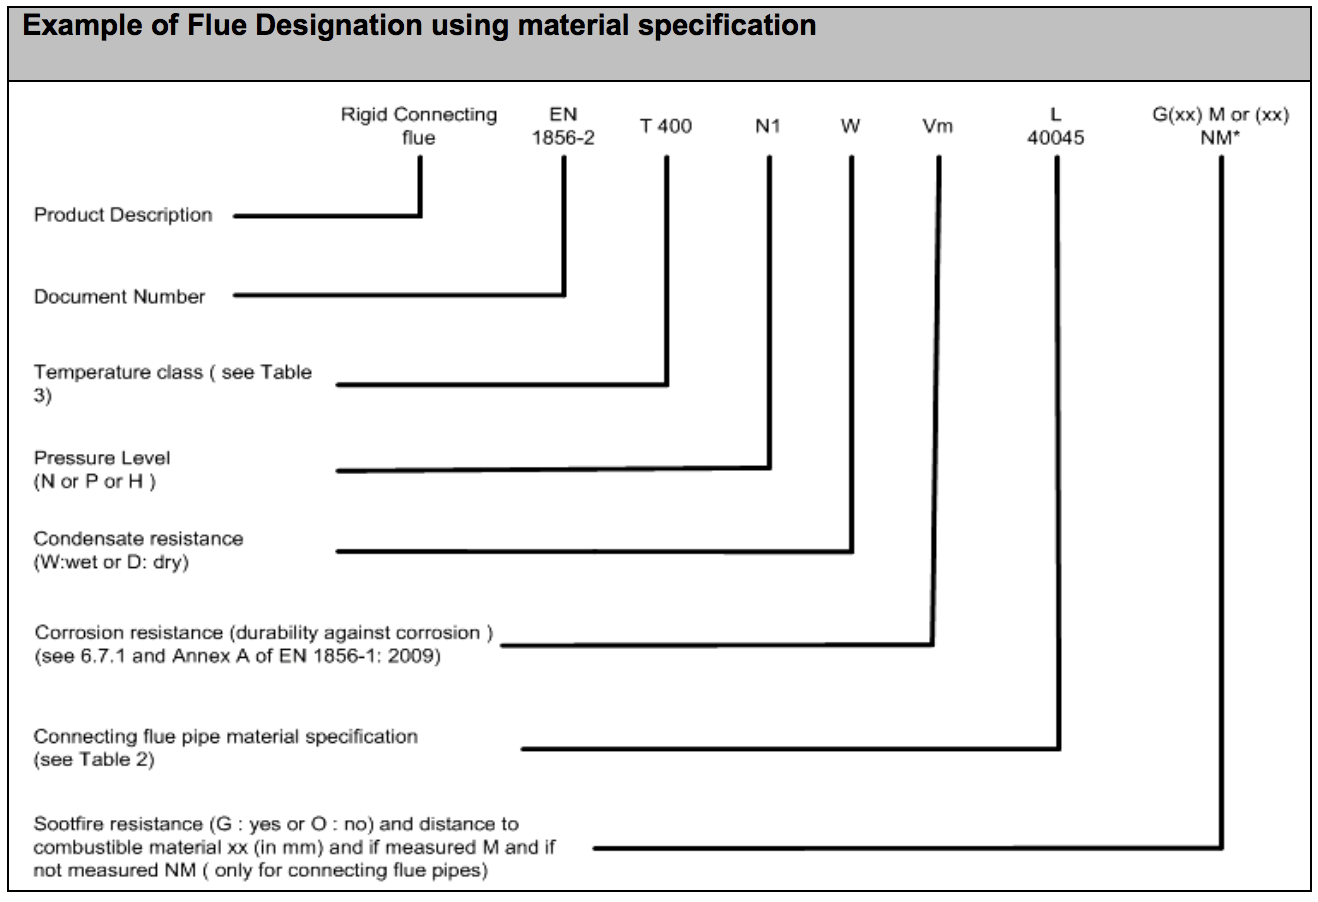 Diagram HJ24 - Example of flue designation using material specification - Extract from TGD J